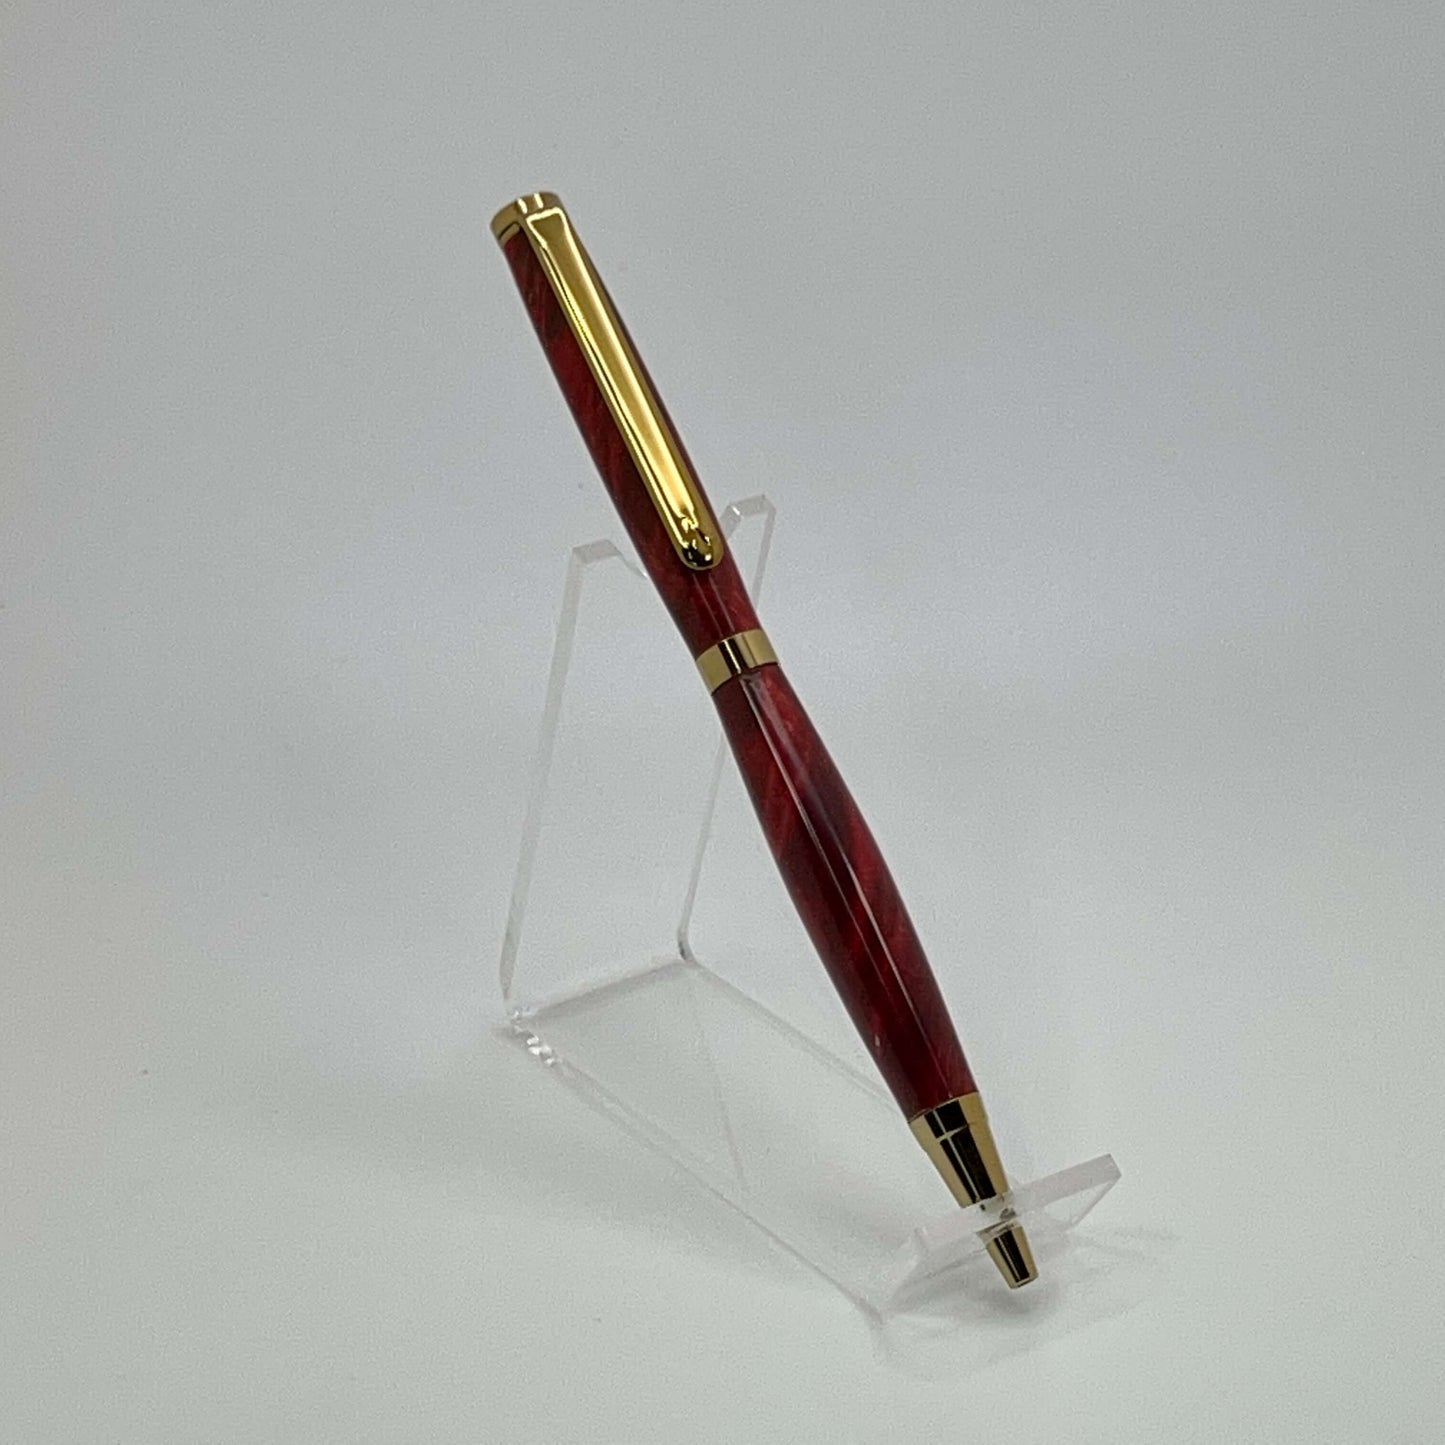 Right side view of handcrafted pen with Box Elder Burl wood dyed red